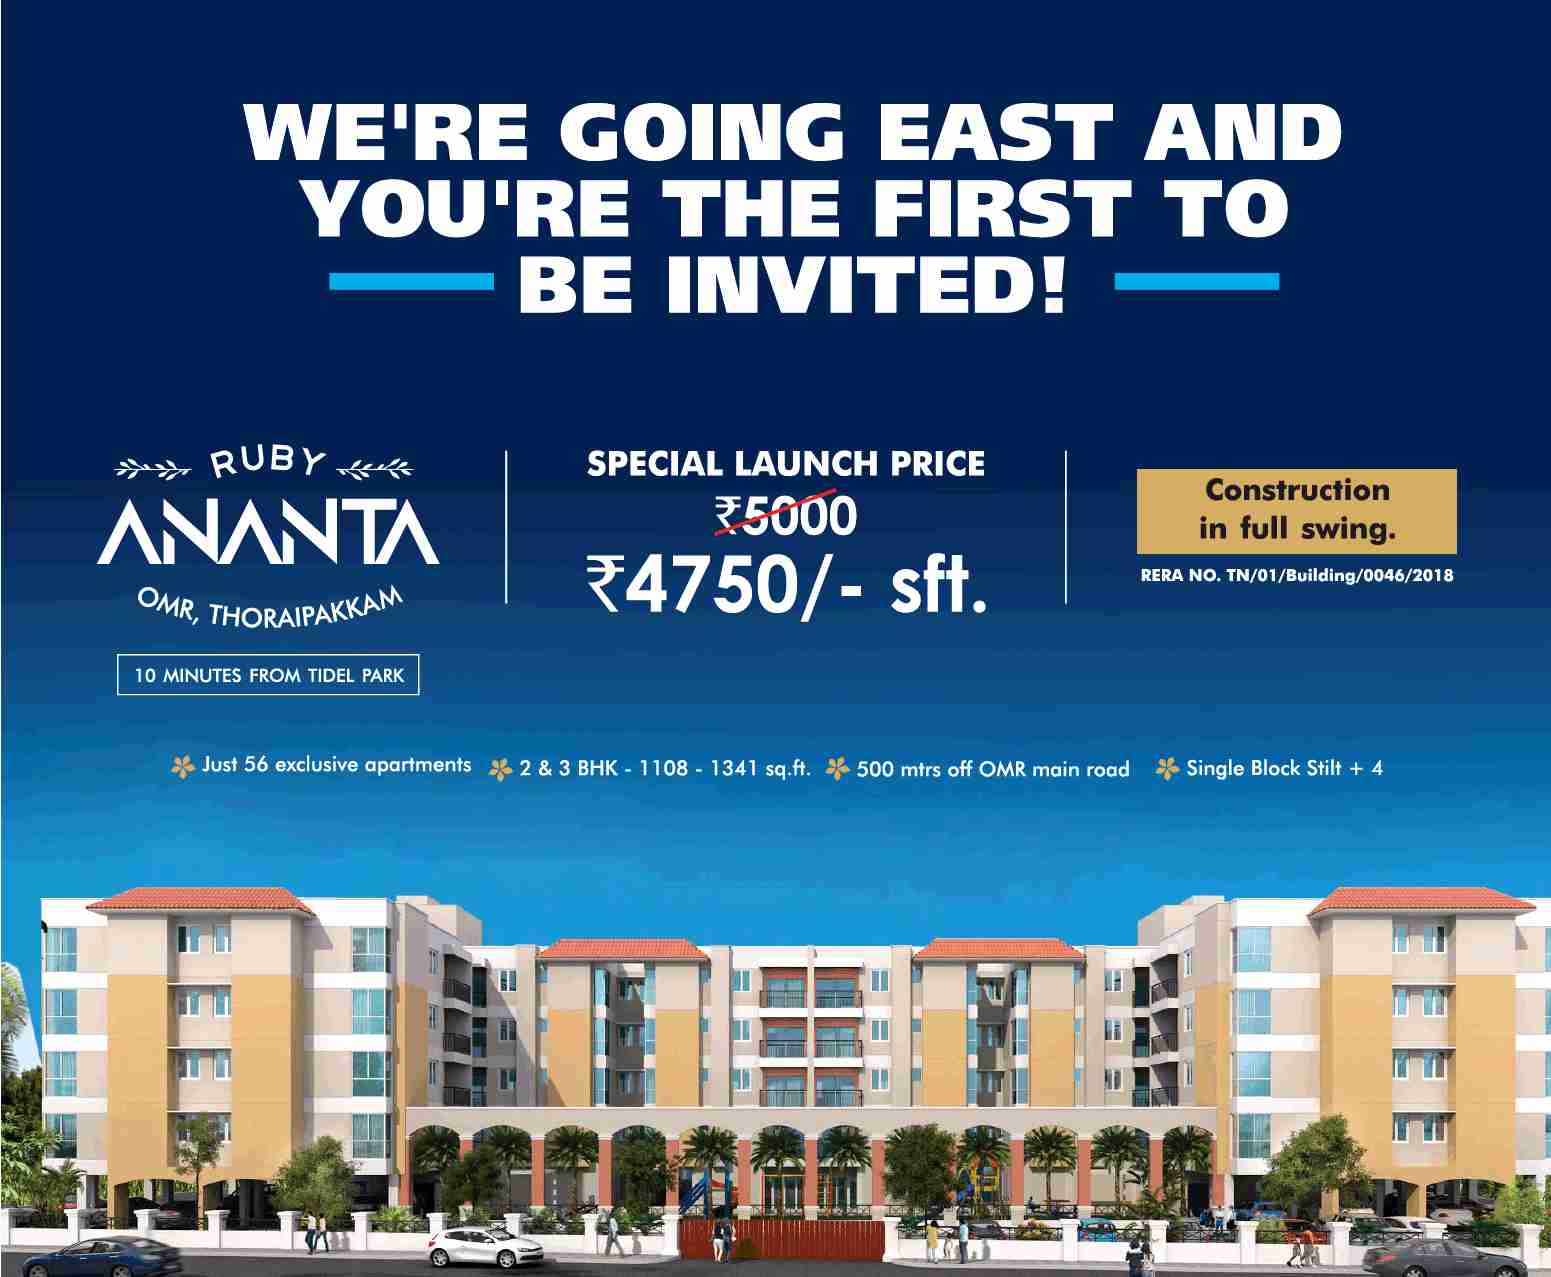 Avail special launch price of Rs. 4750 per sqft. at Ruby Ananta in Chennai